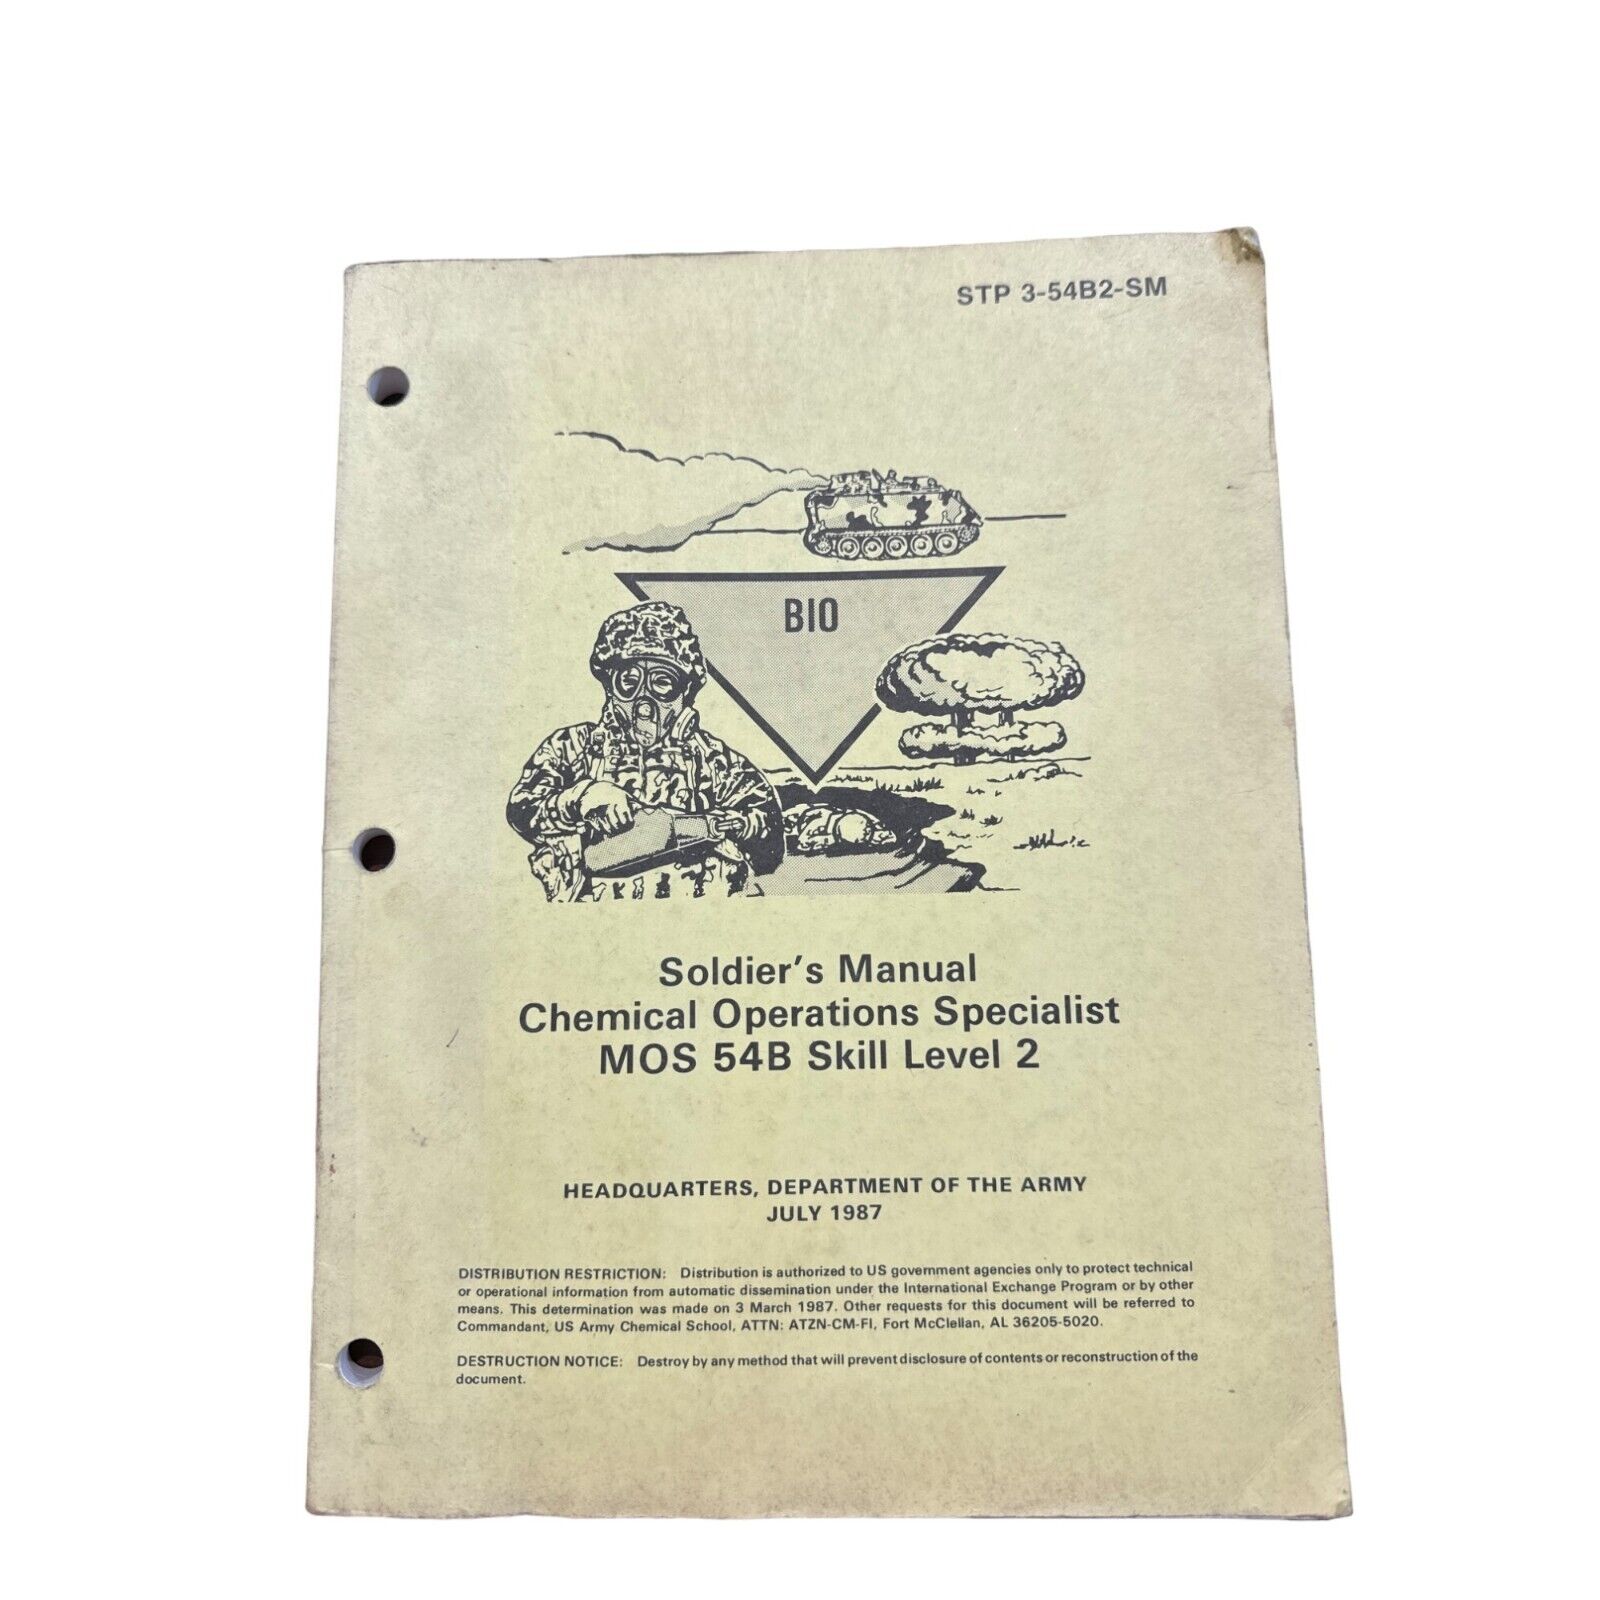 Chemical Operations Specialist Soldier's Manual STP 3-54B2-SM MOS 54B